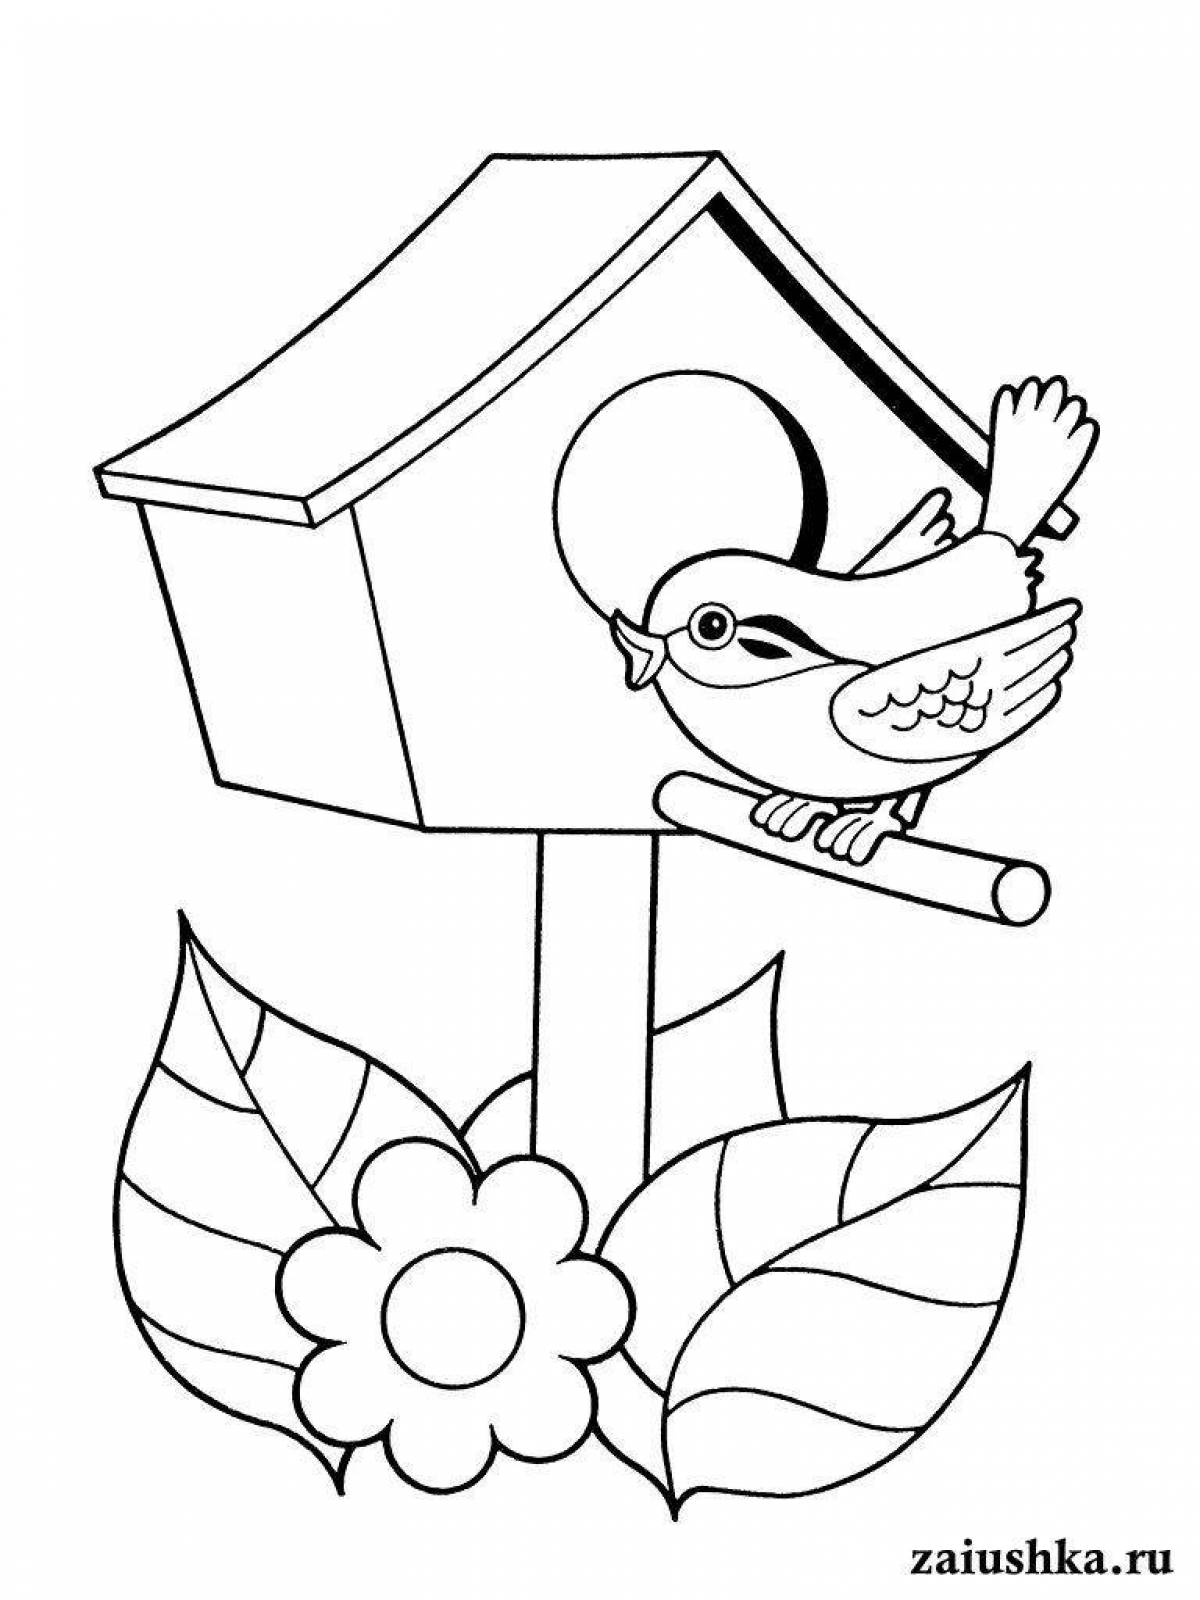 Amazing bird feeder coloring page for 3-4 year olds